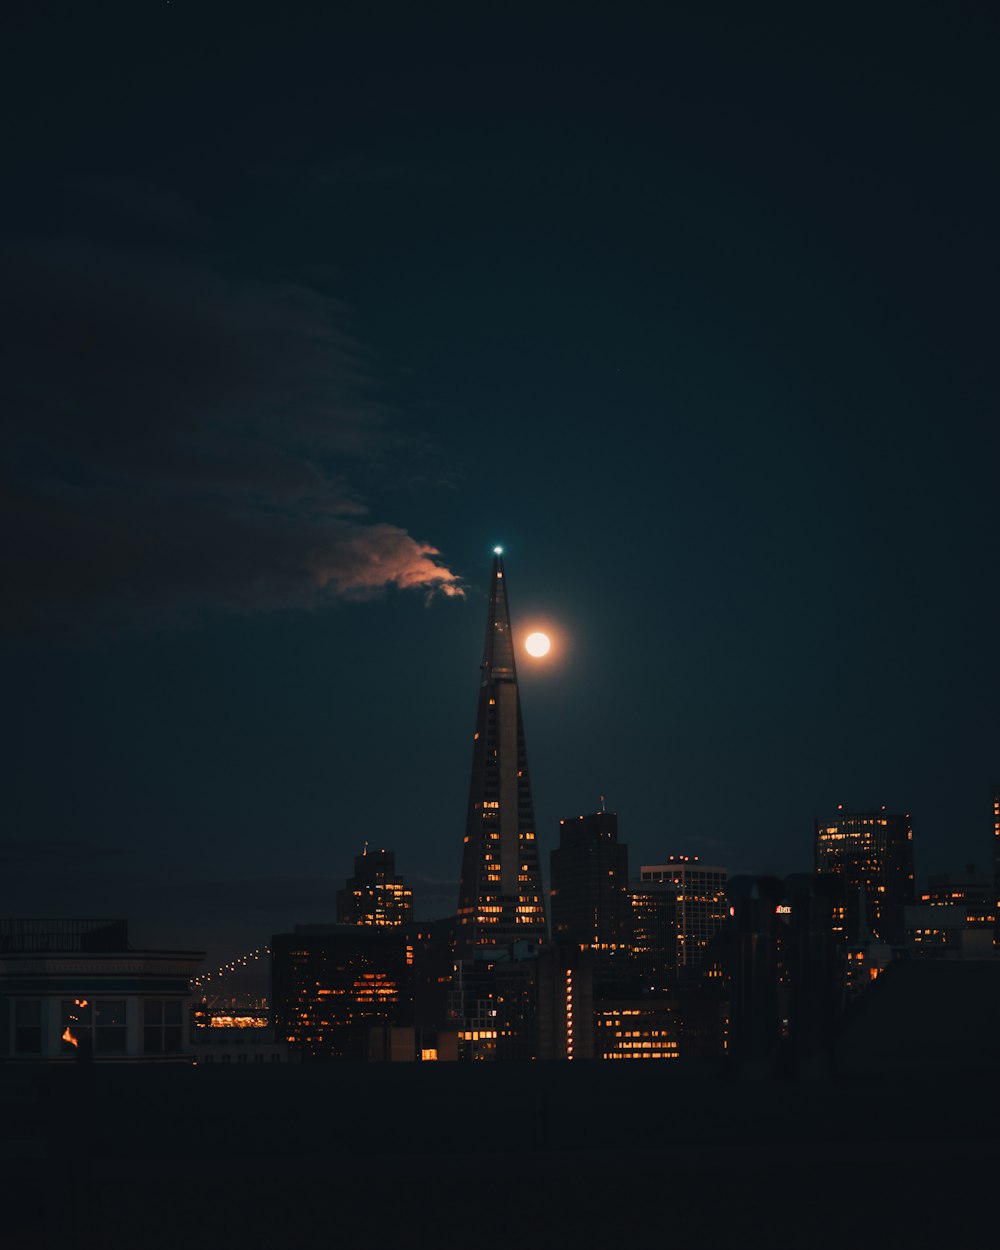 a full moon rising over a city at night